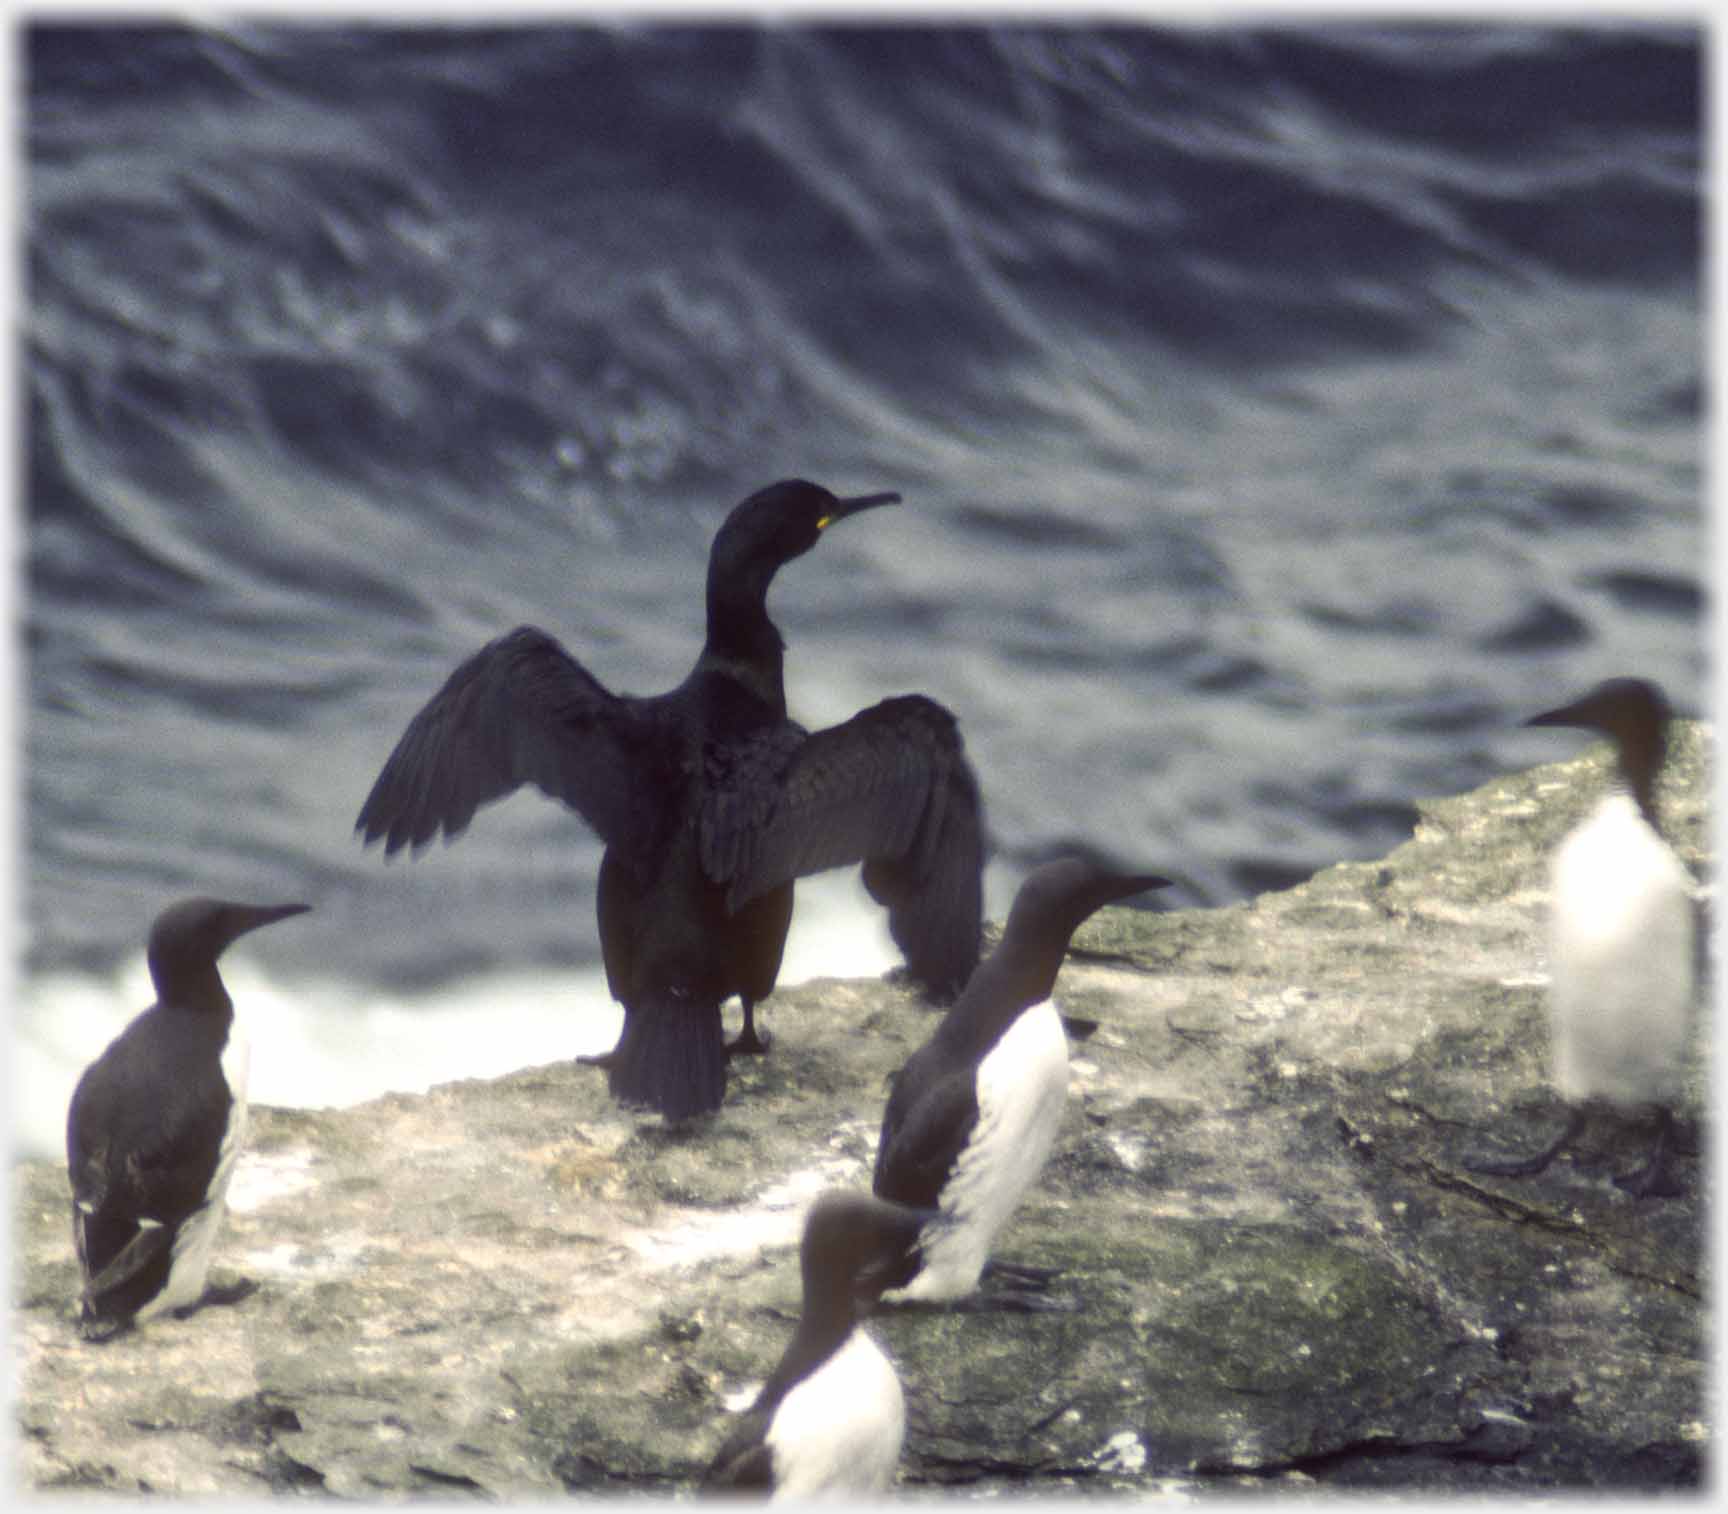 Shag flapping its wings with gullemots standing around.